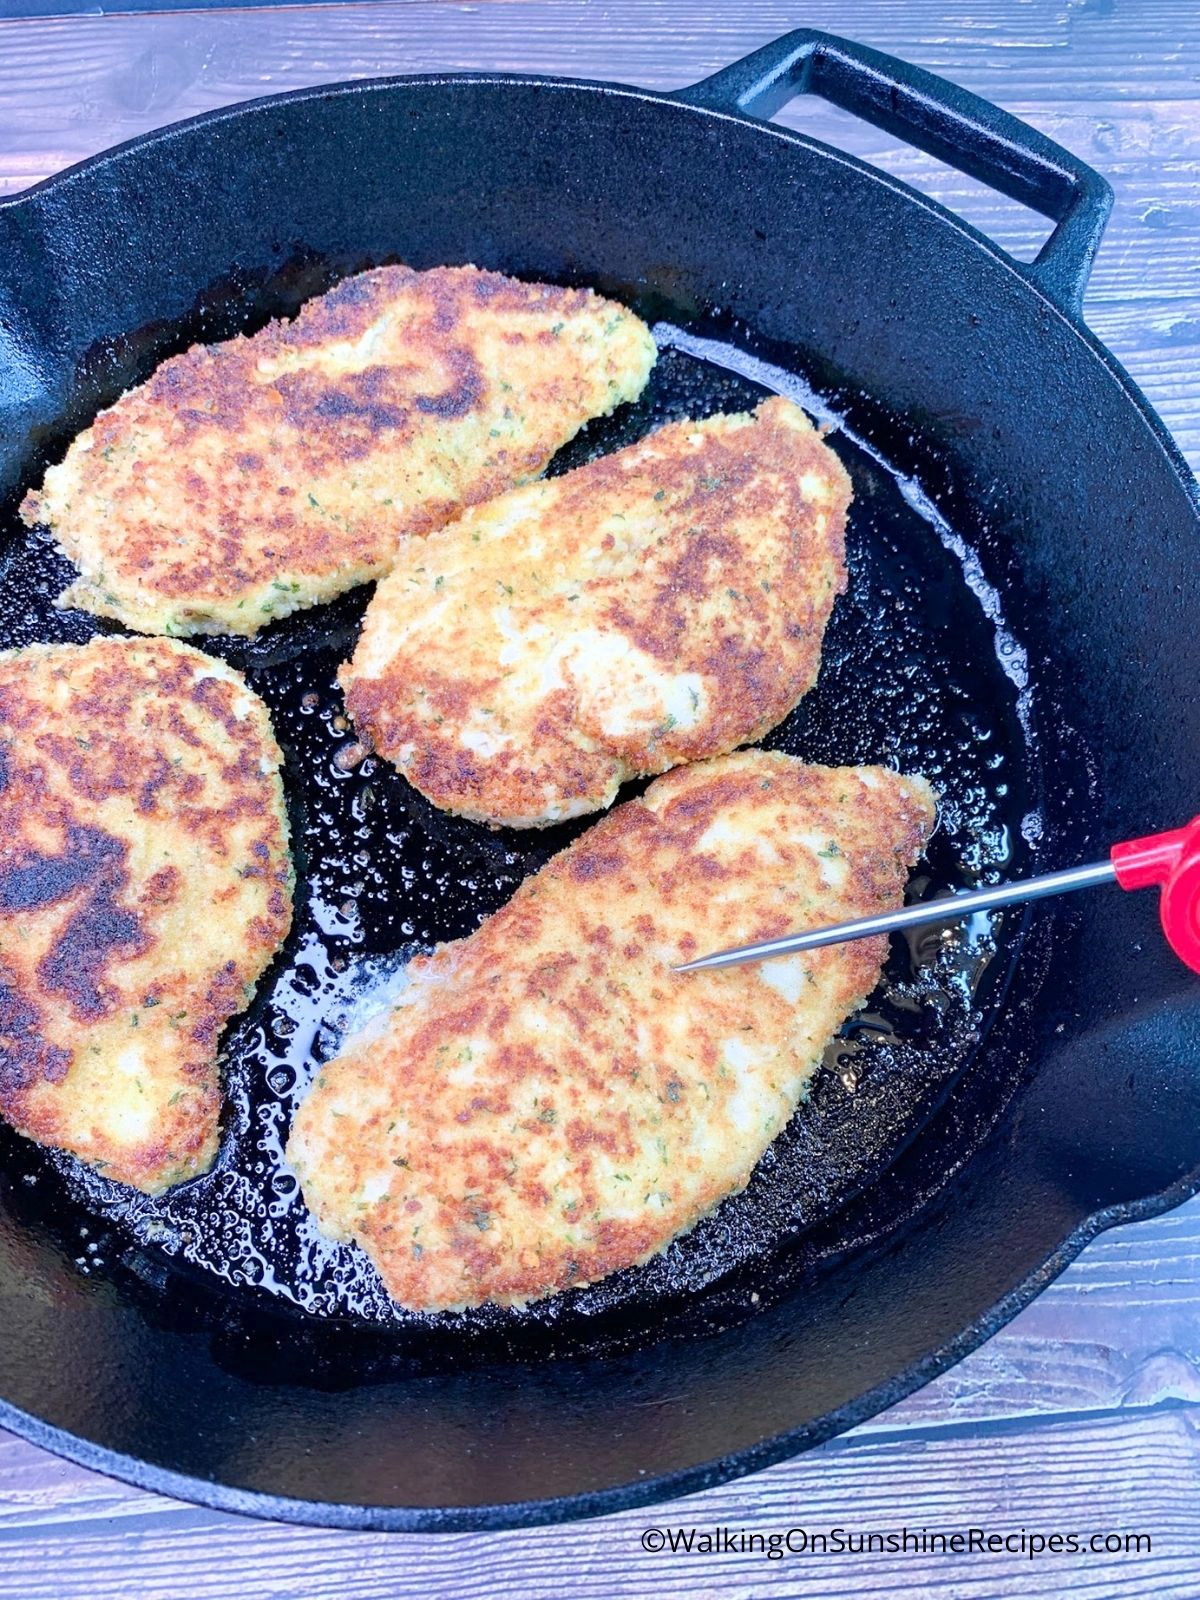 Cooked Perdue chicken cutlets in cast iron skillet.